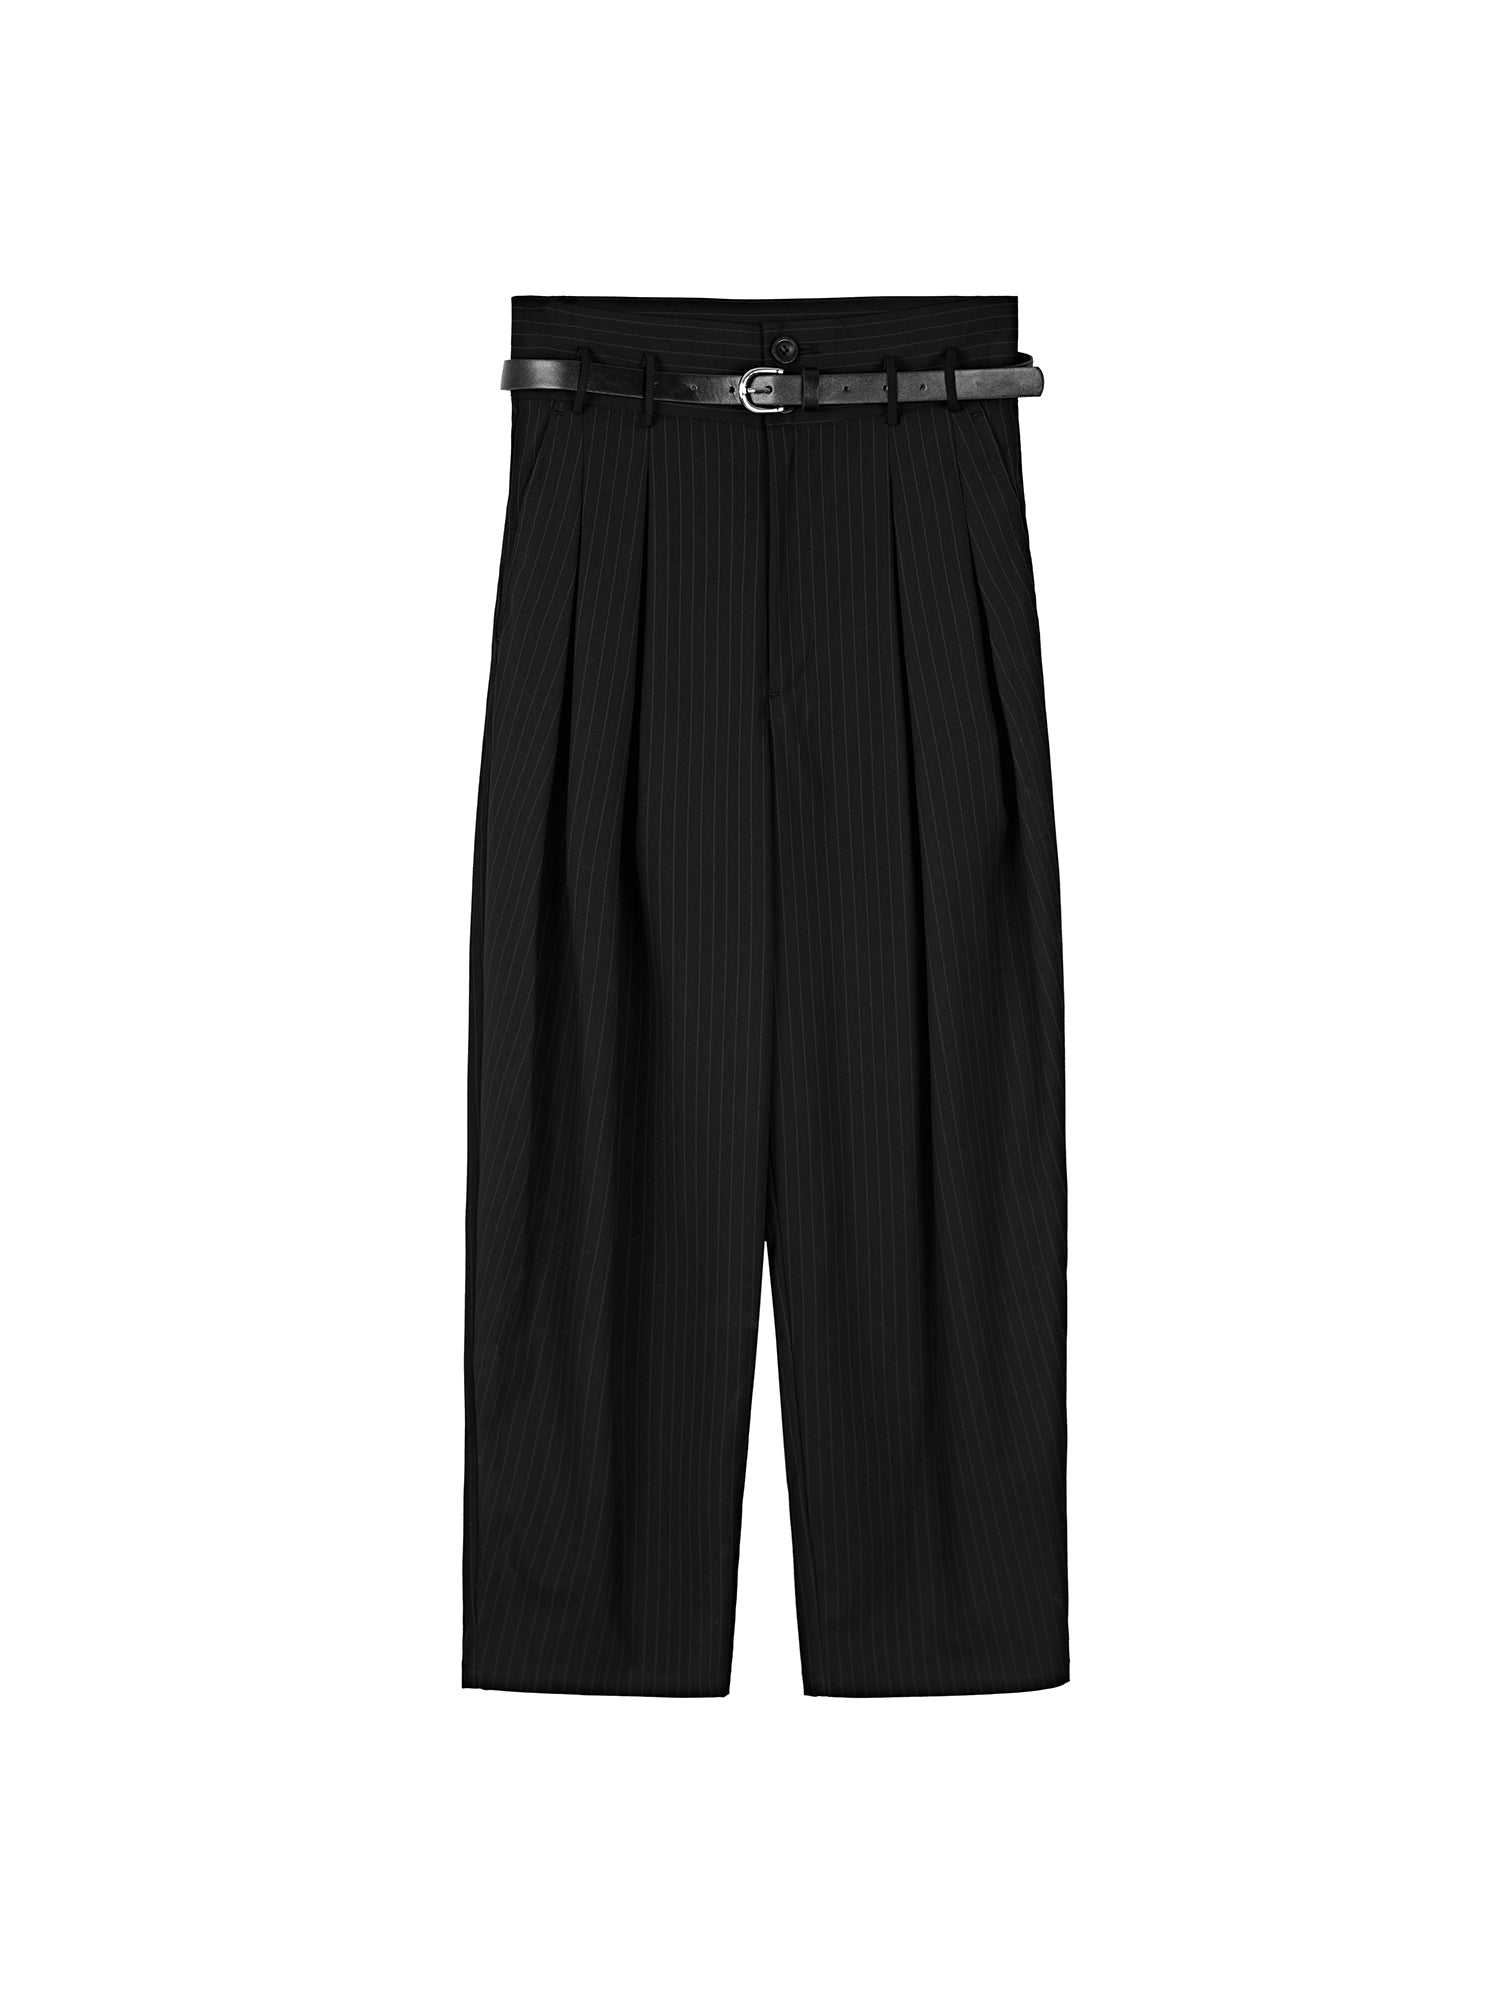 Striped Pleated High-Waist Commuter Trousers With Belt